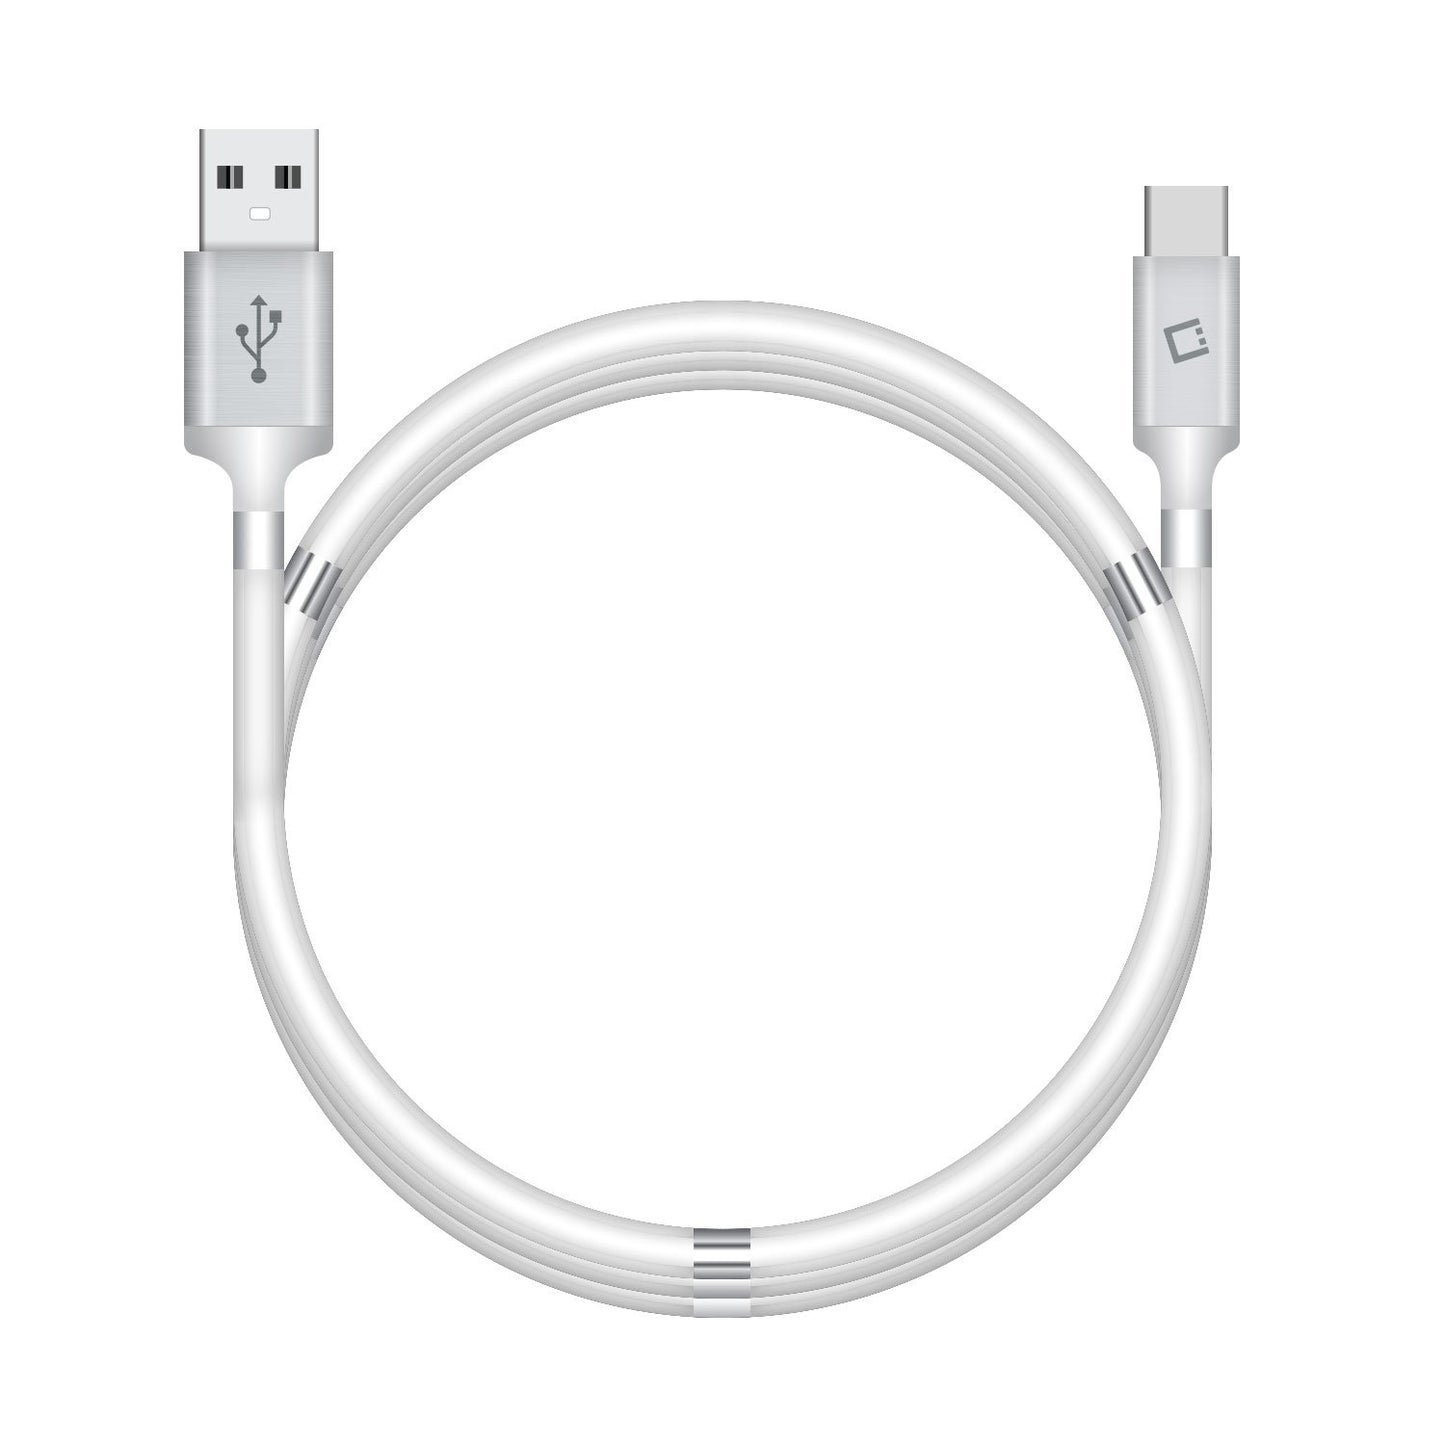 DCACOIL3WT - USB-C Charging Cable, Magnetic Self Winding, Tangle Free, USB-C to USB-A Charging and Data Cord- 3.3ft. (1m)